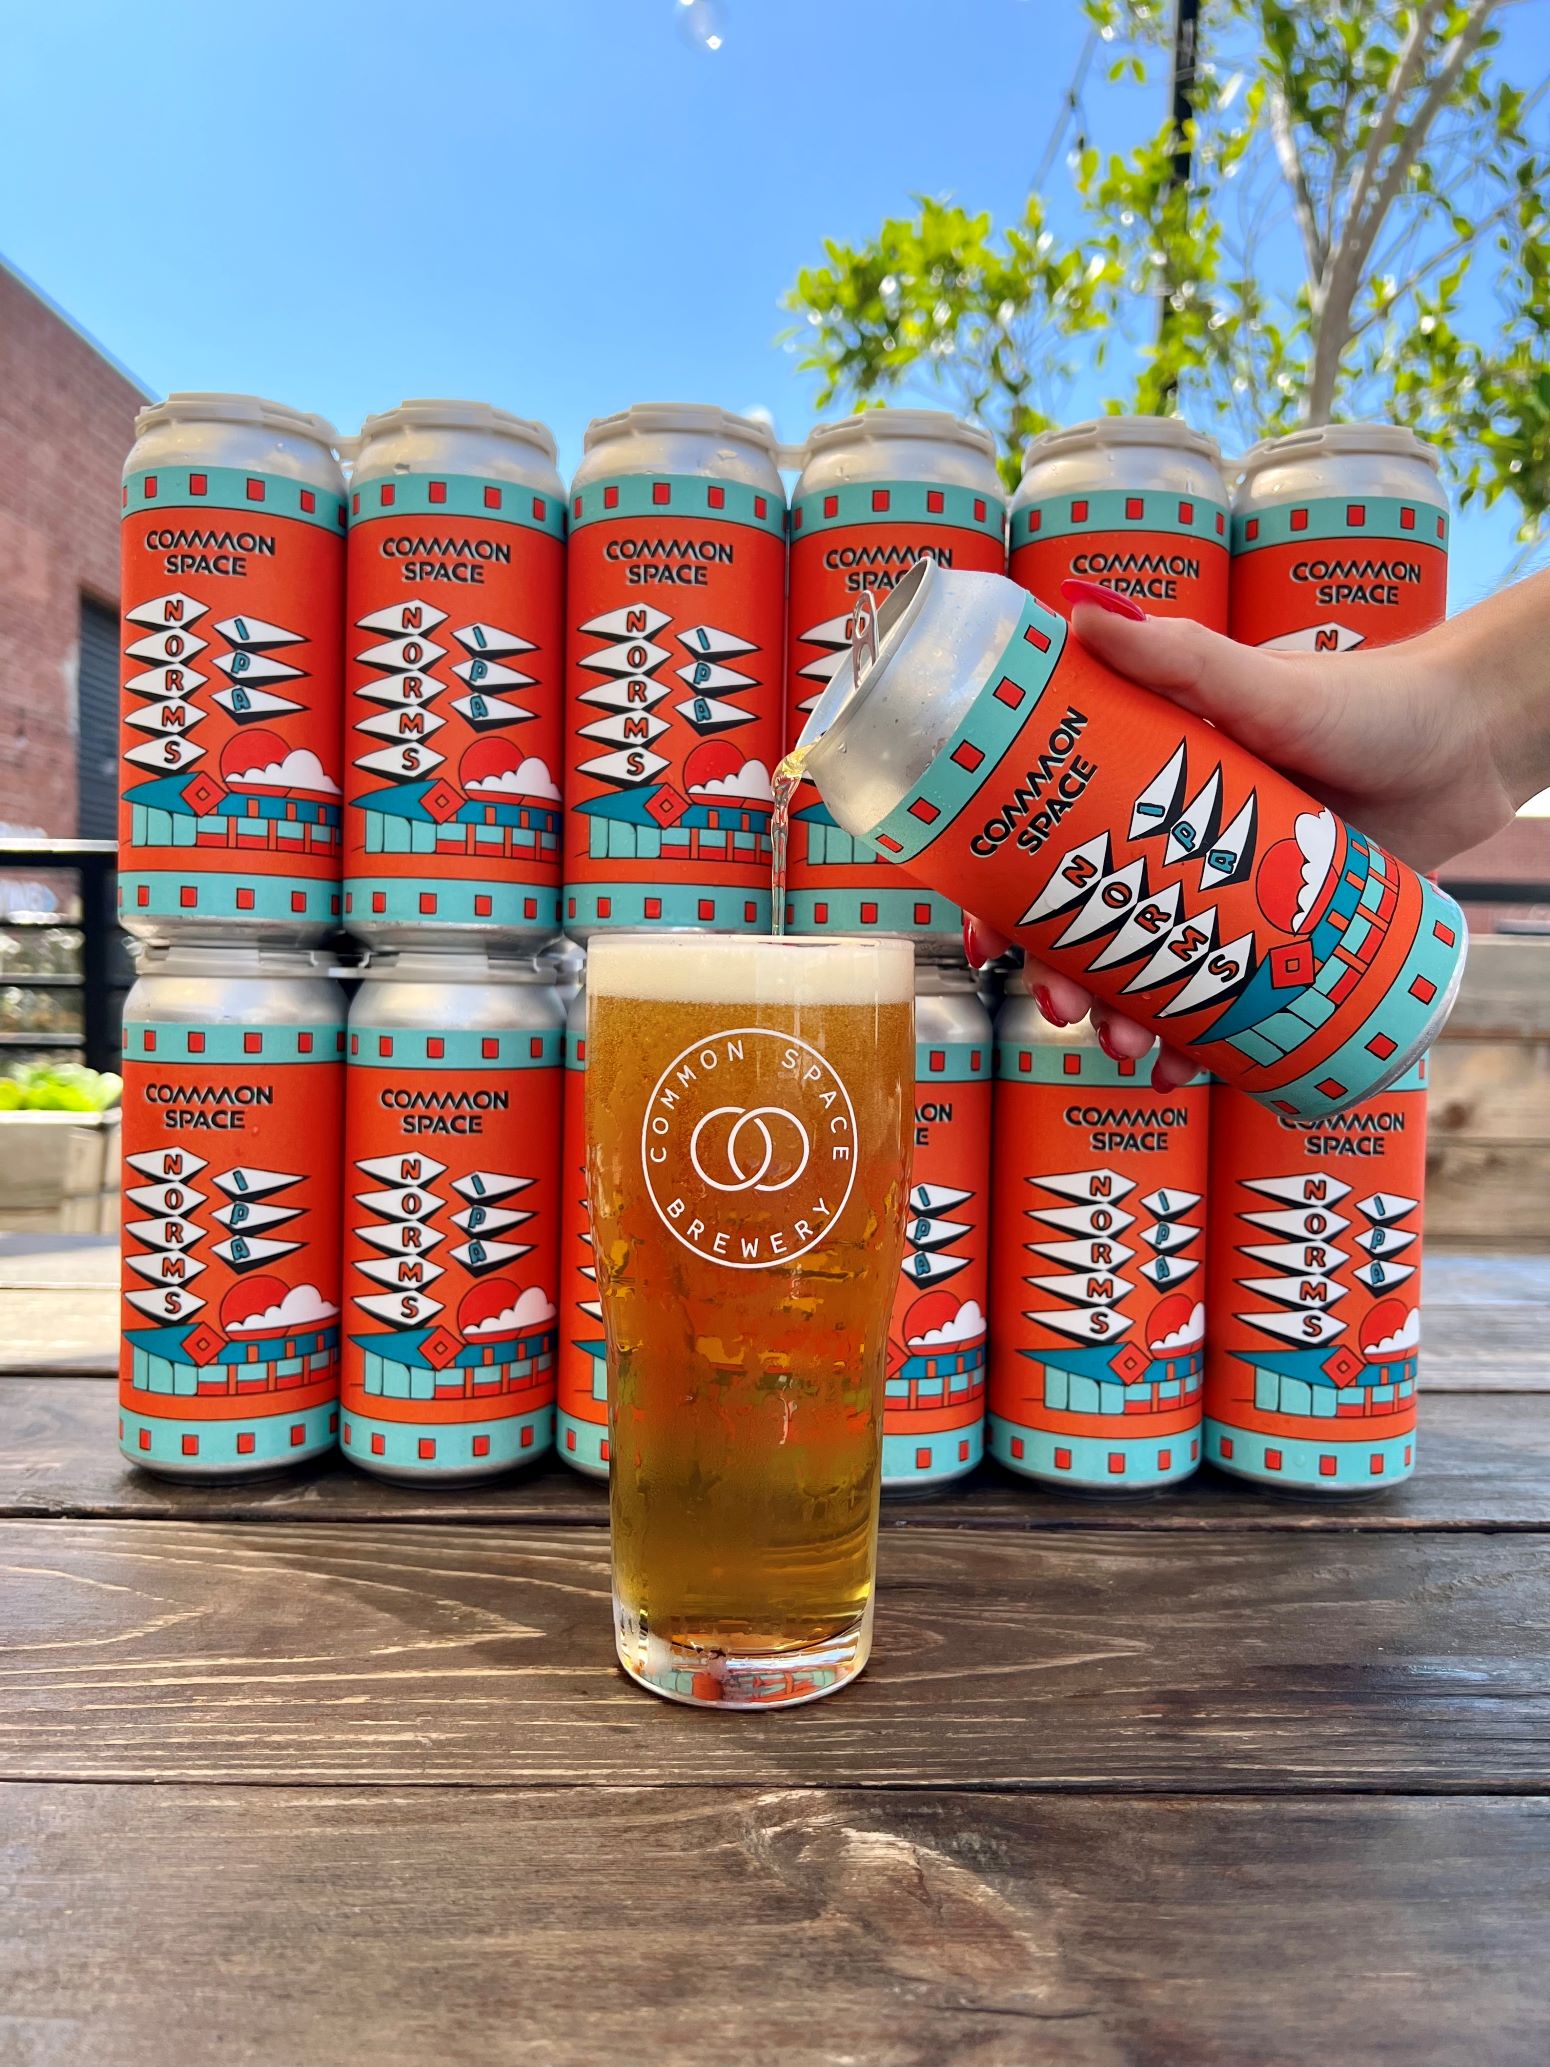 An image of cans of NORMS new IPA, and someone pouring a can into a glass.